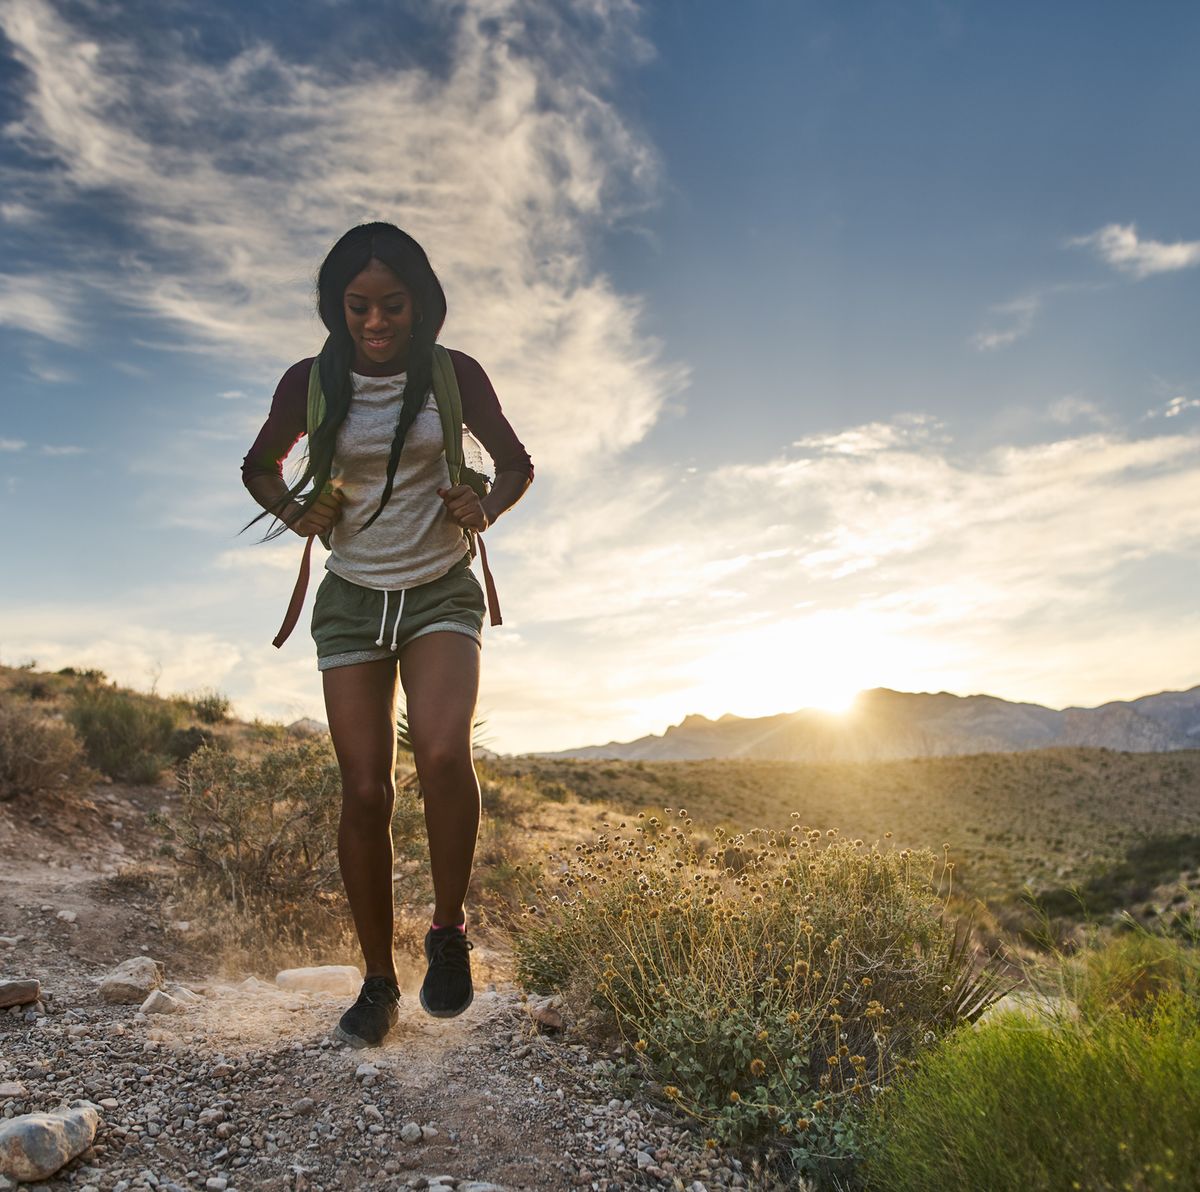 How to Start Hiking - Tips for Using Hiking as Cross-Training